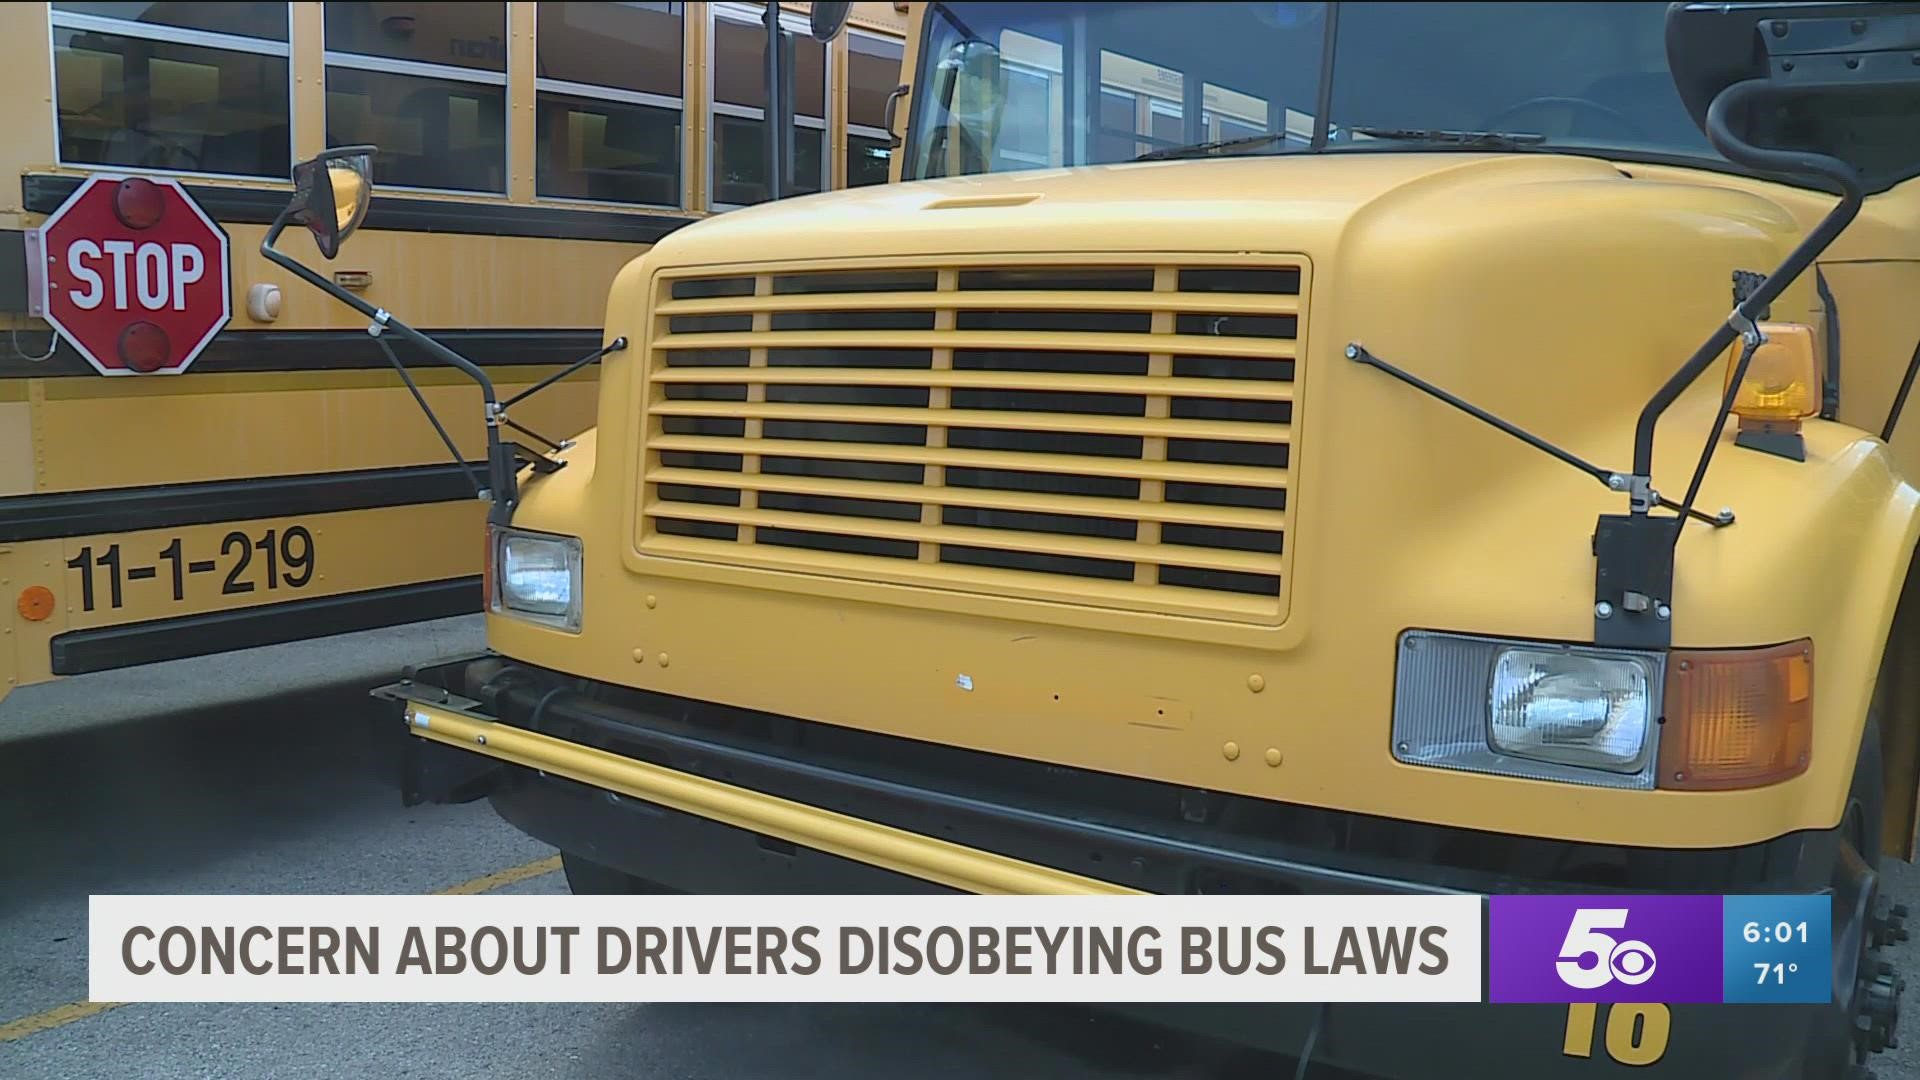 Law enforcement says there’s been an uptick in drivers not stopping as they should behind stopped school buses causing safety concerns for children.